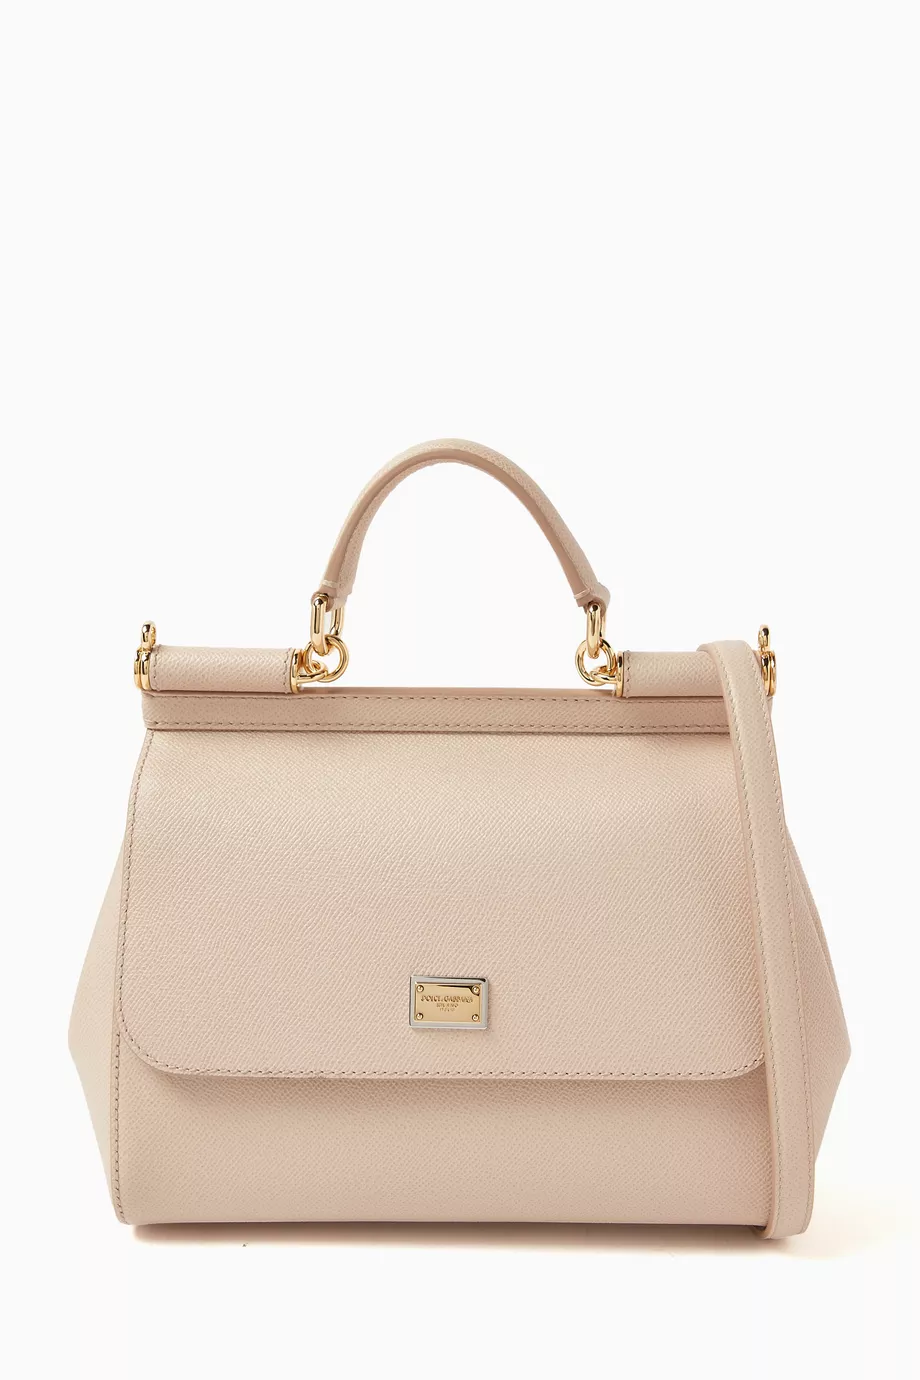 Dolce & Gabbana Small Sicily Bag In Dauphine Leather In Rosa Carne